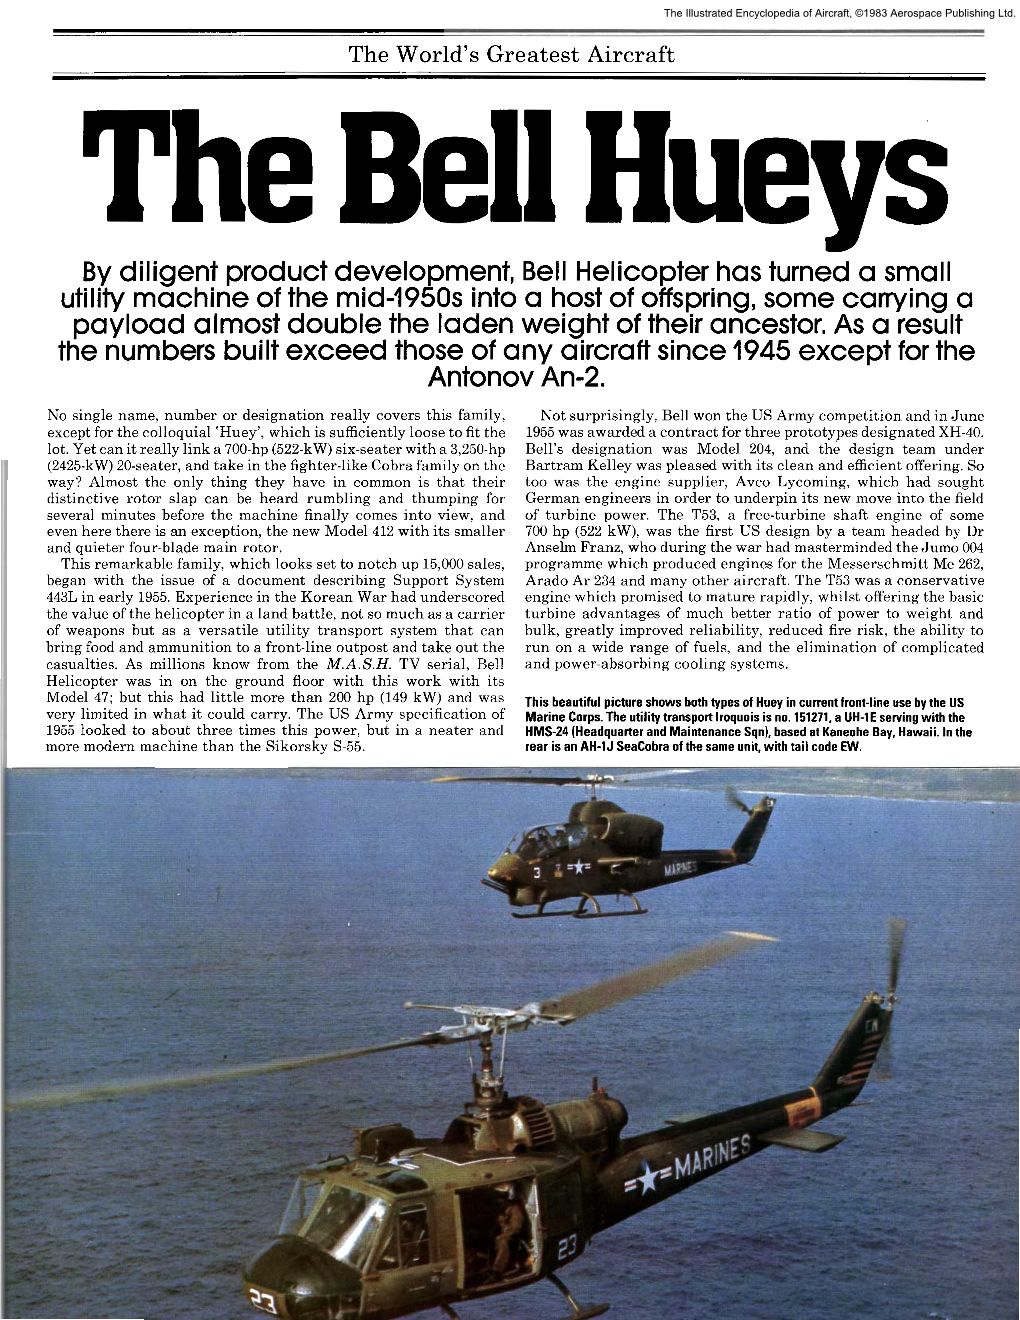 By Diligent Product Development, Bell Helicopter Has Turned a Small